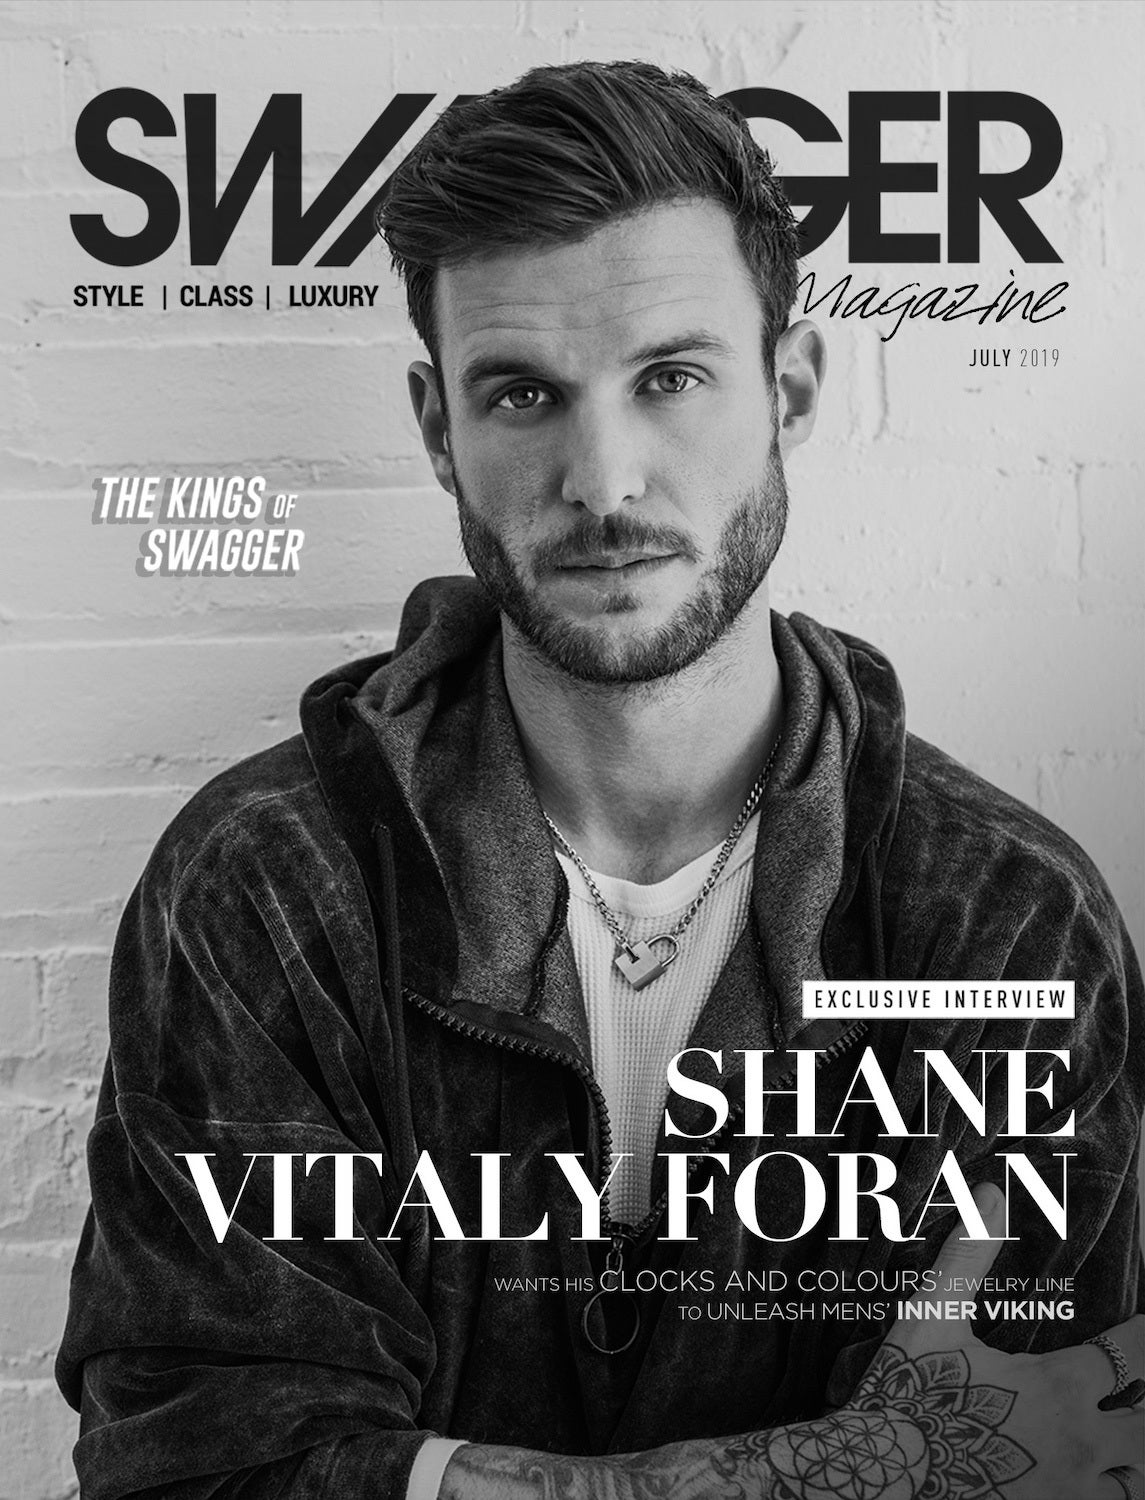 Shane Vitaly Foran - Vitaly Clocks and Colours - Facebook Feature on SWAGGER Magazine